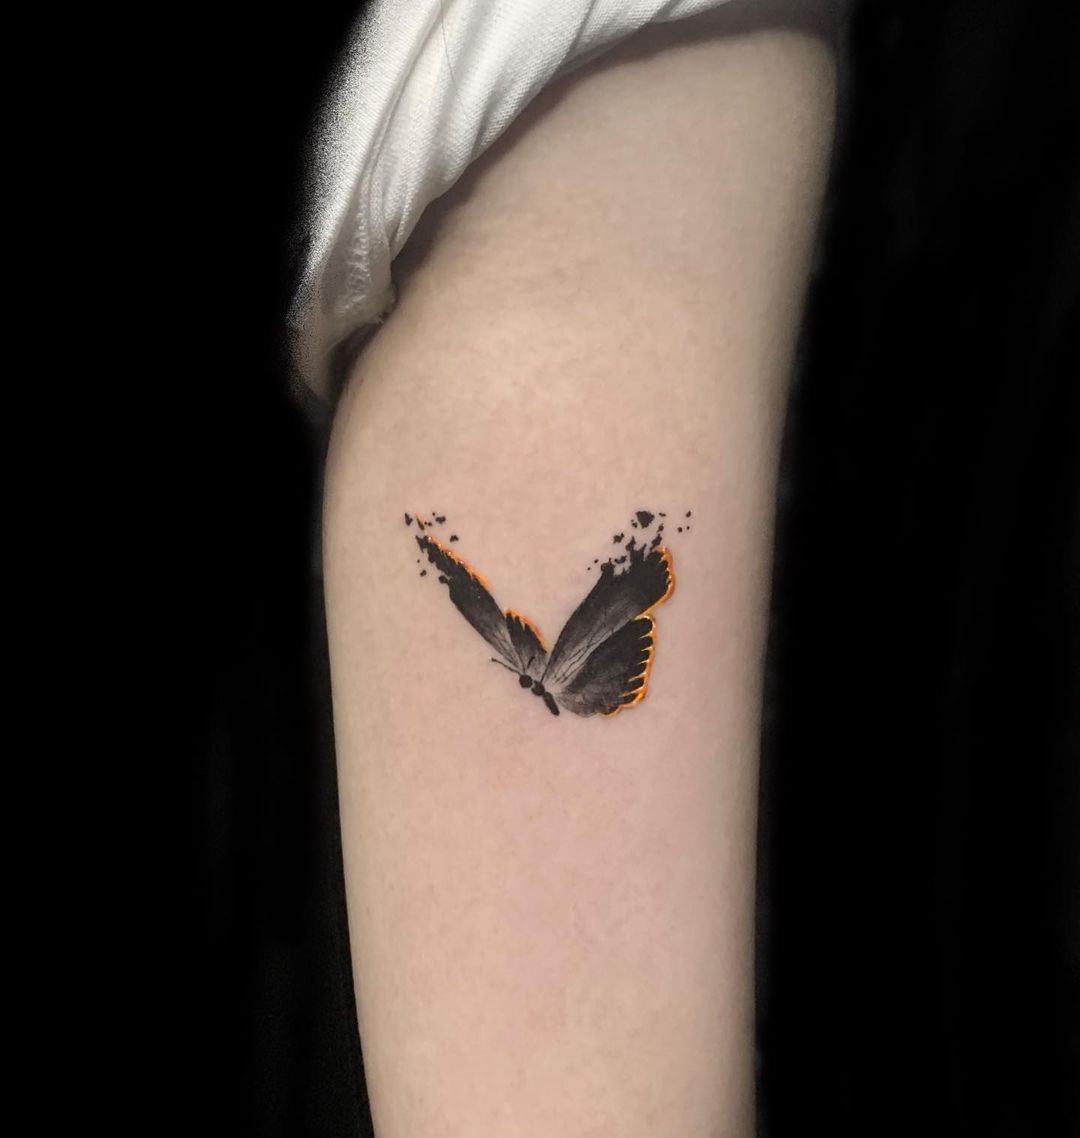 Burning Butterfly tattoo